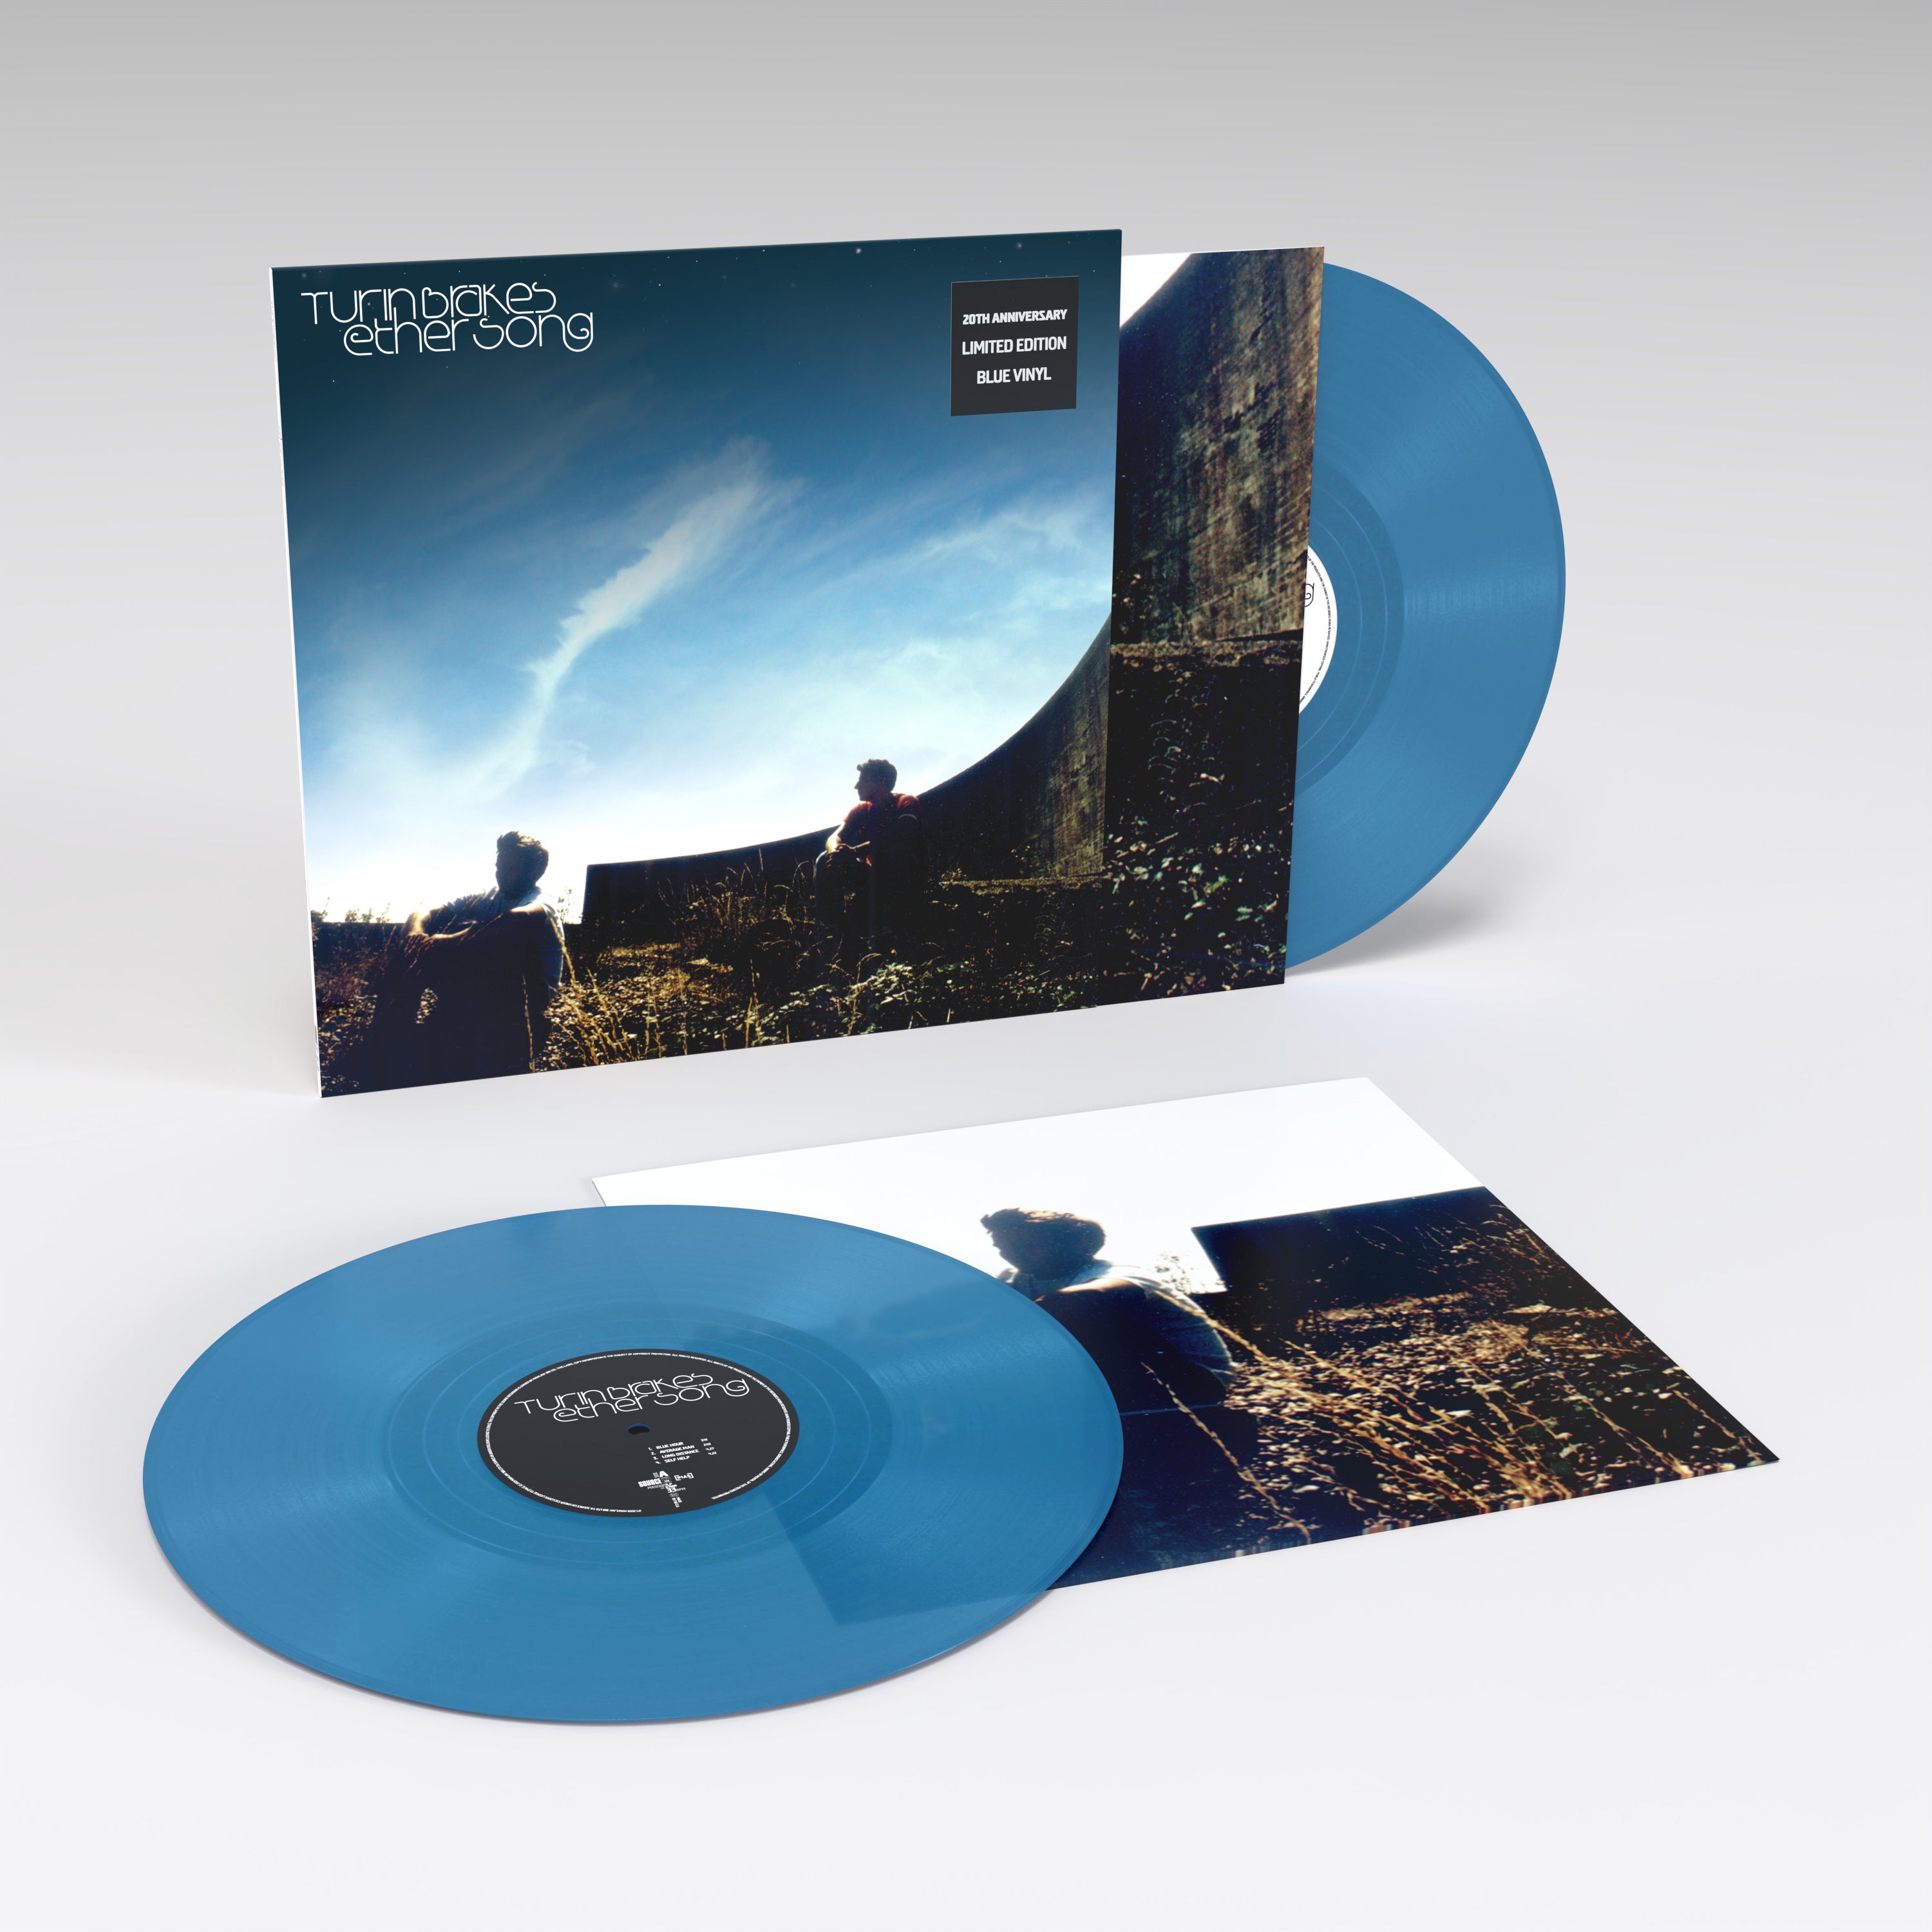 Turin Brakes - Ether Song: Limited Blue Vinyl 2LP